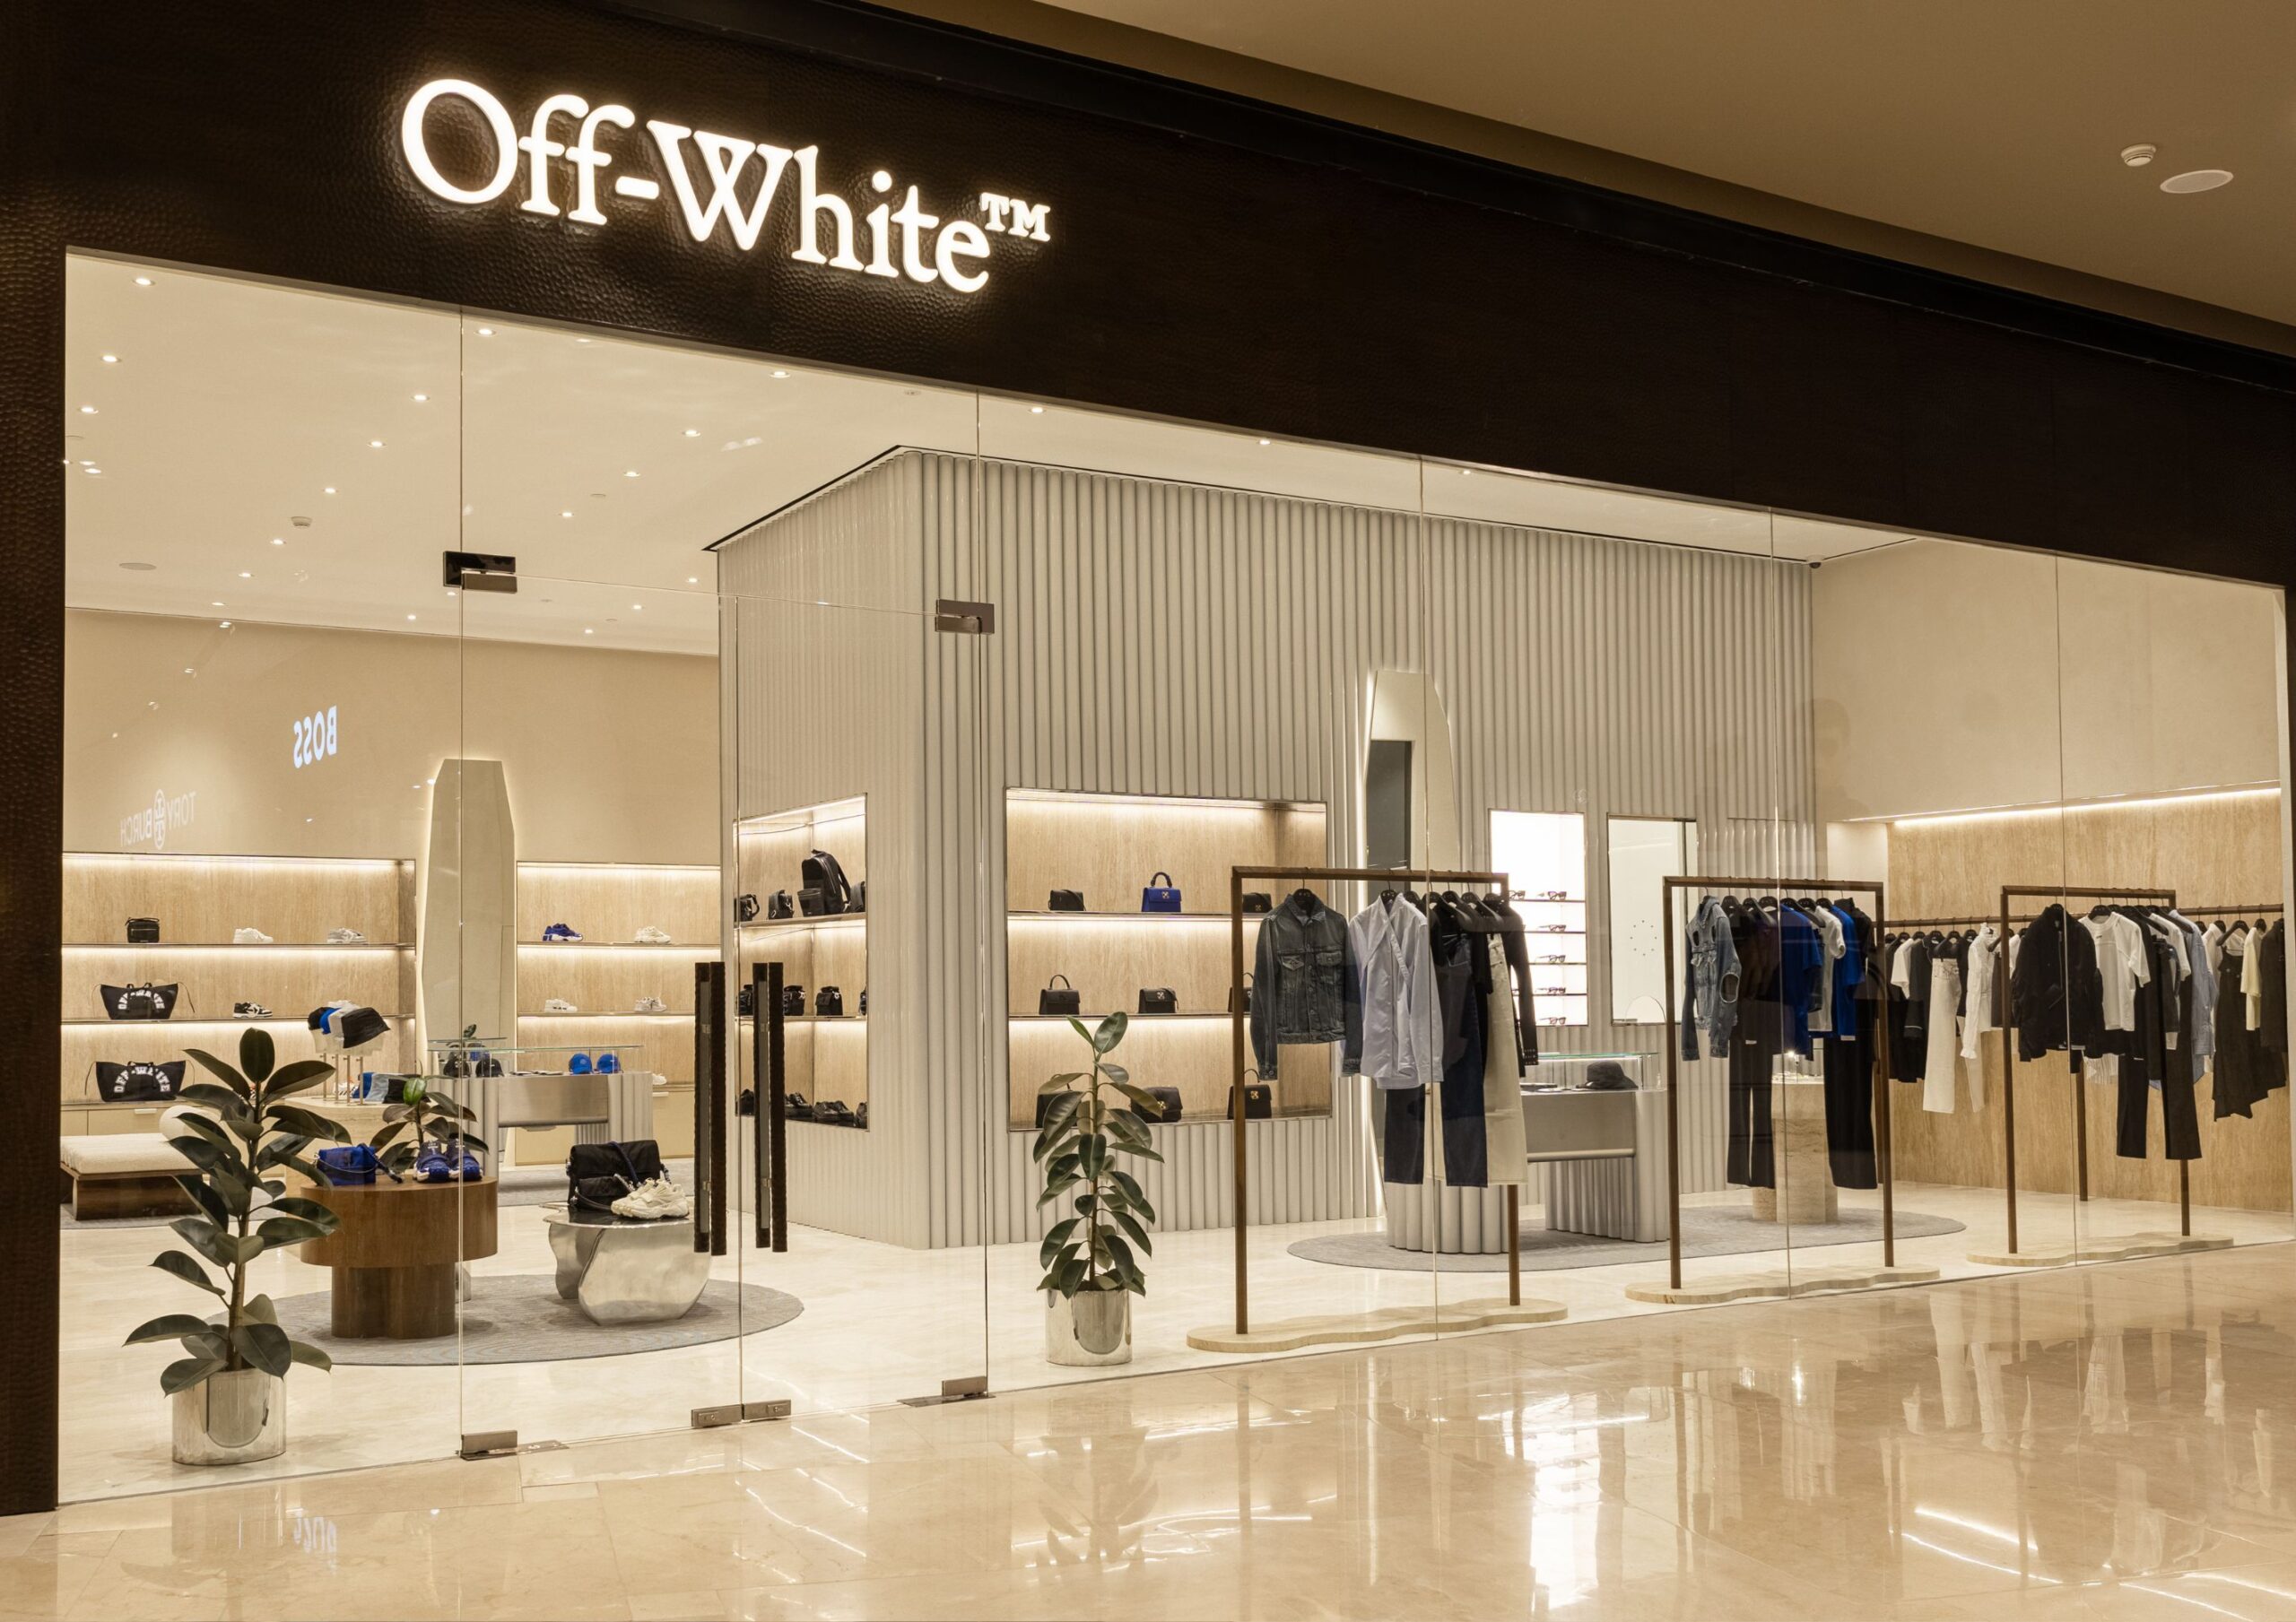 Store front Off White with minimalist off white interiors and high end designer fashion items.